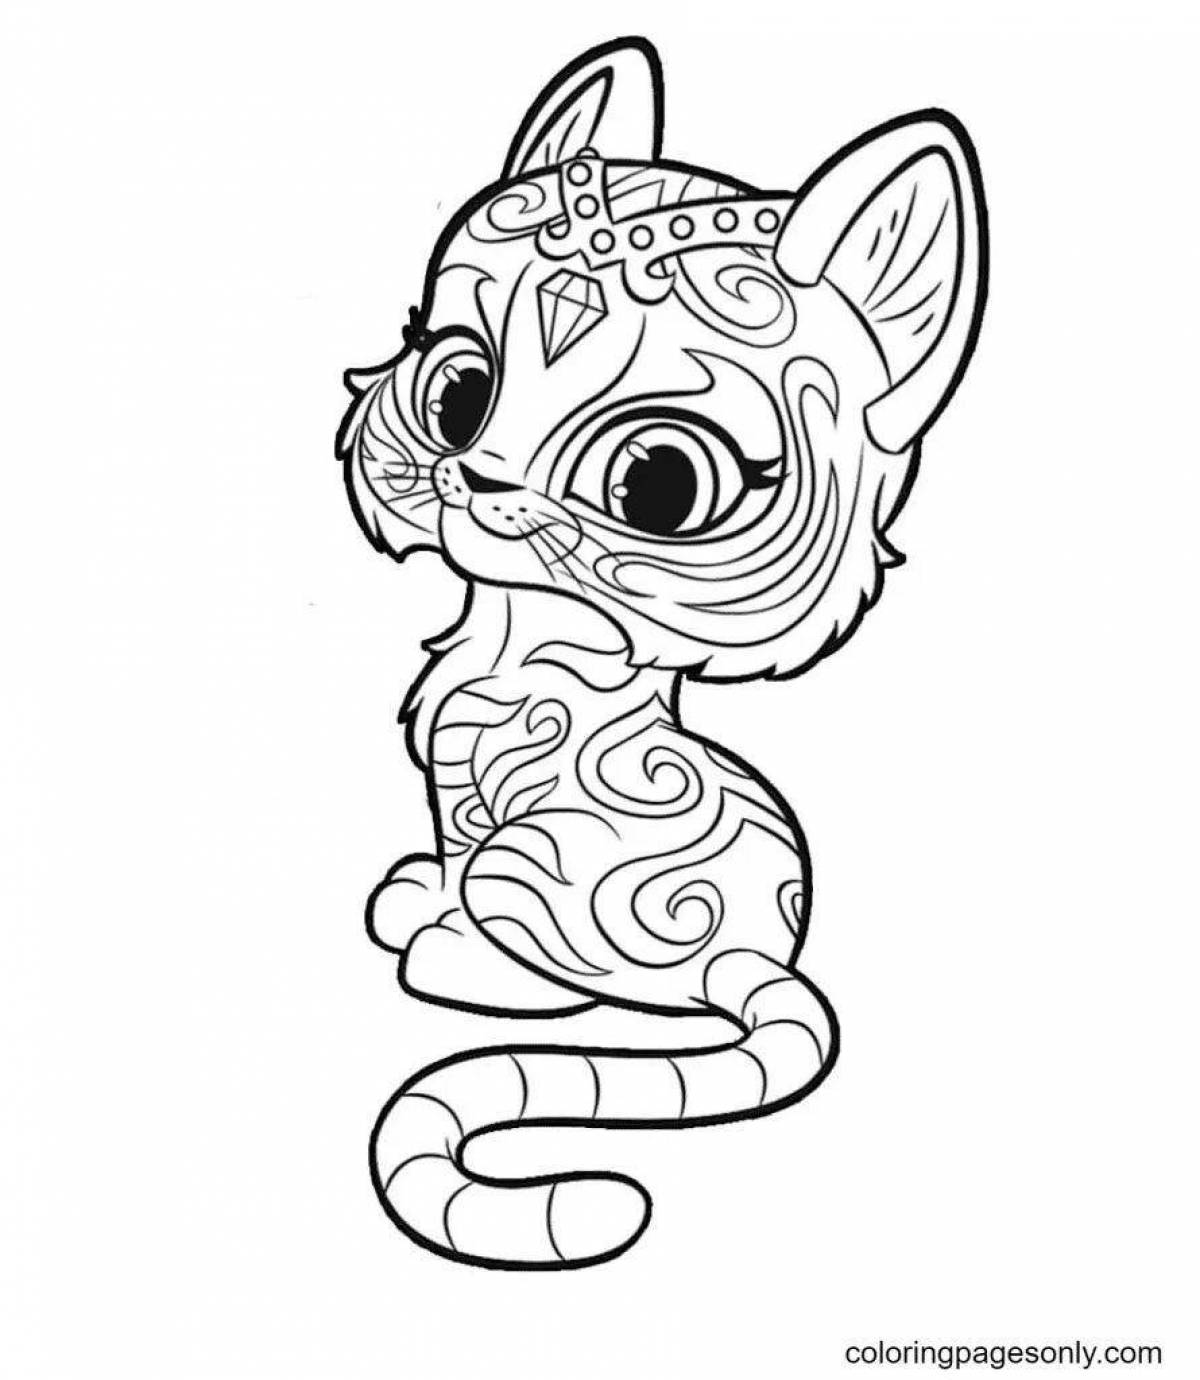 Coloring page funny felicity